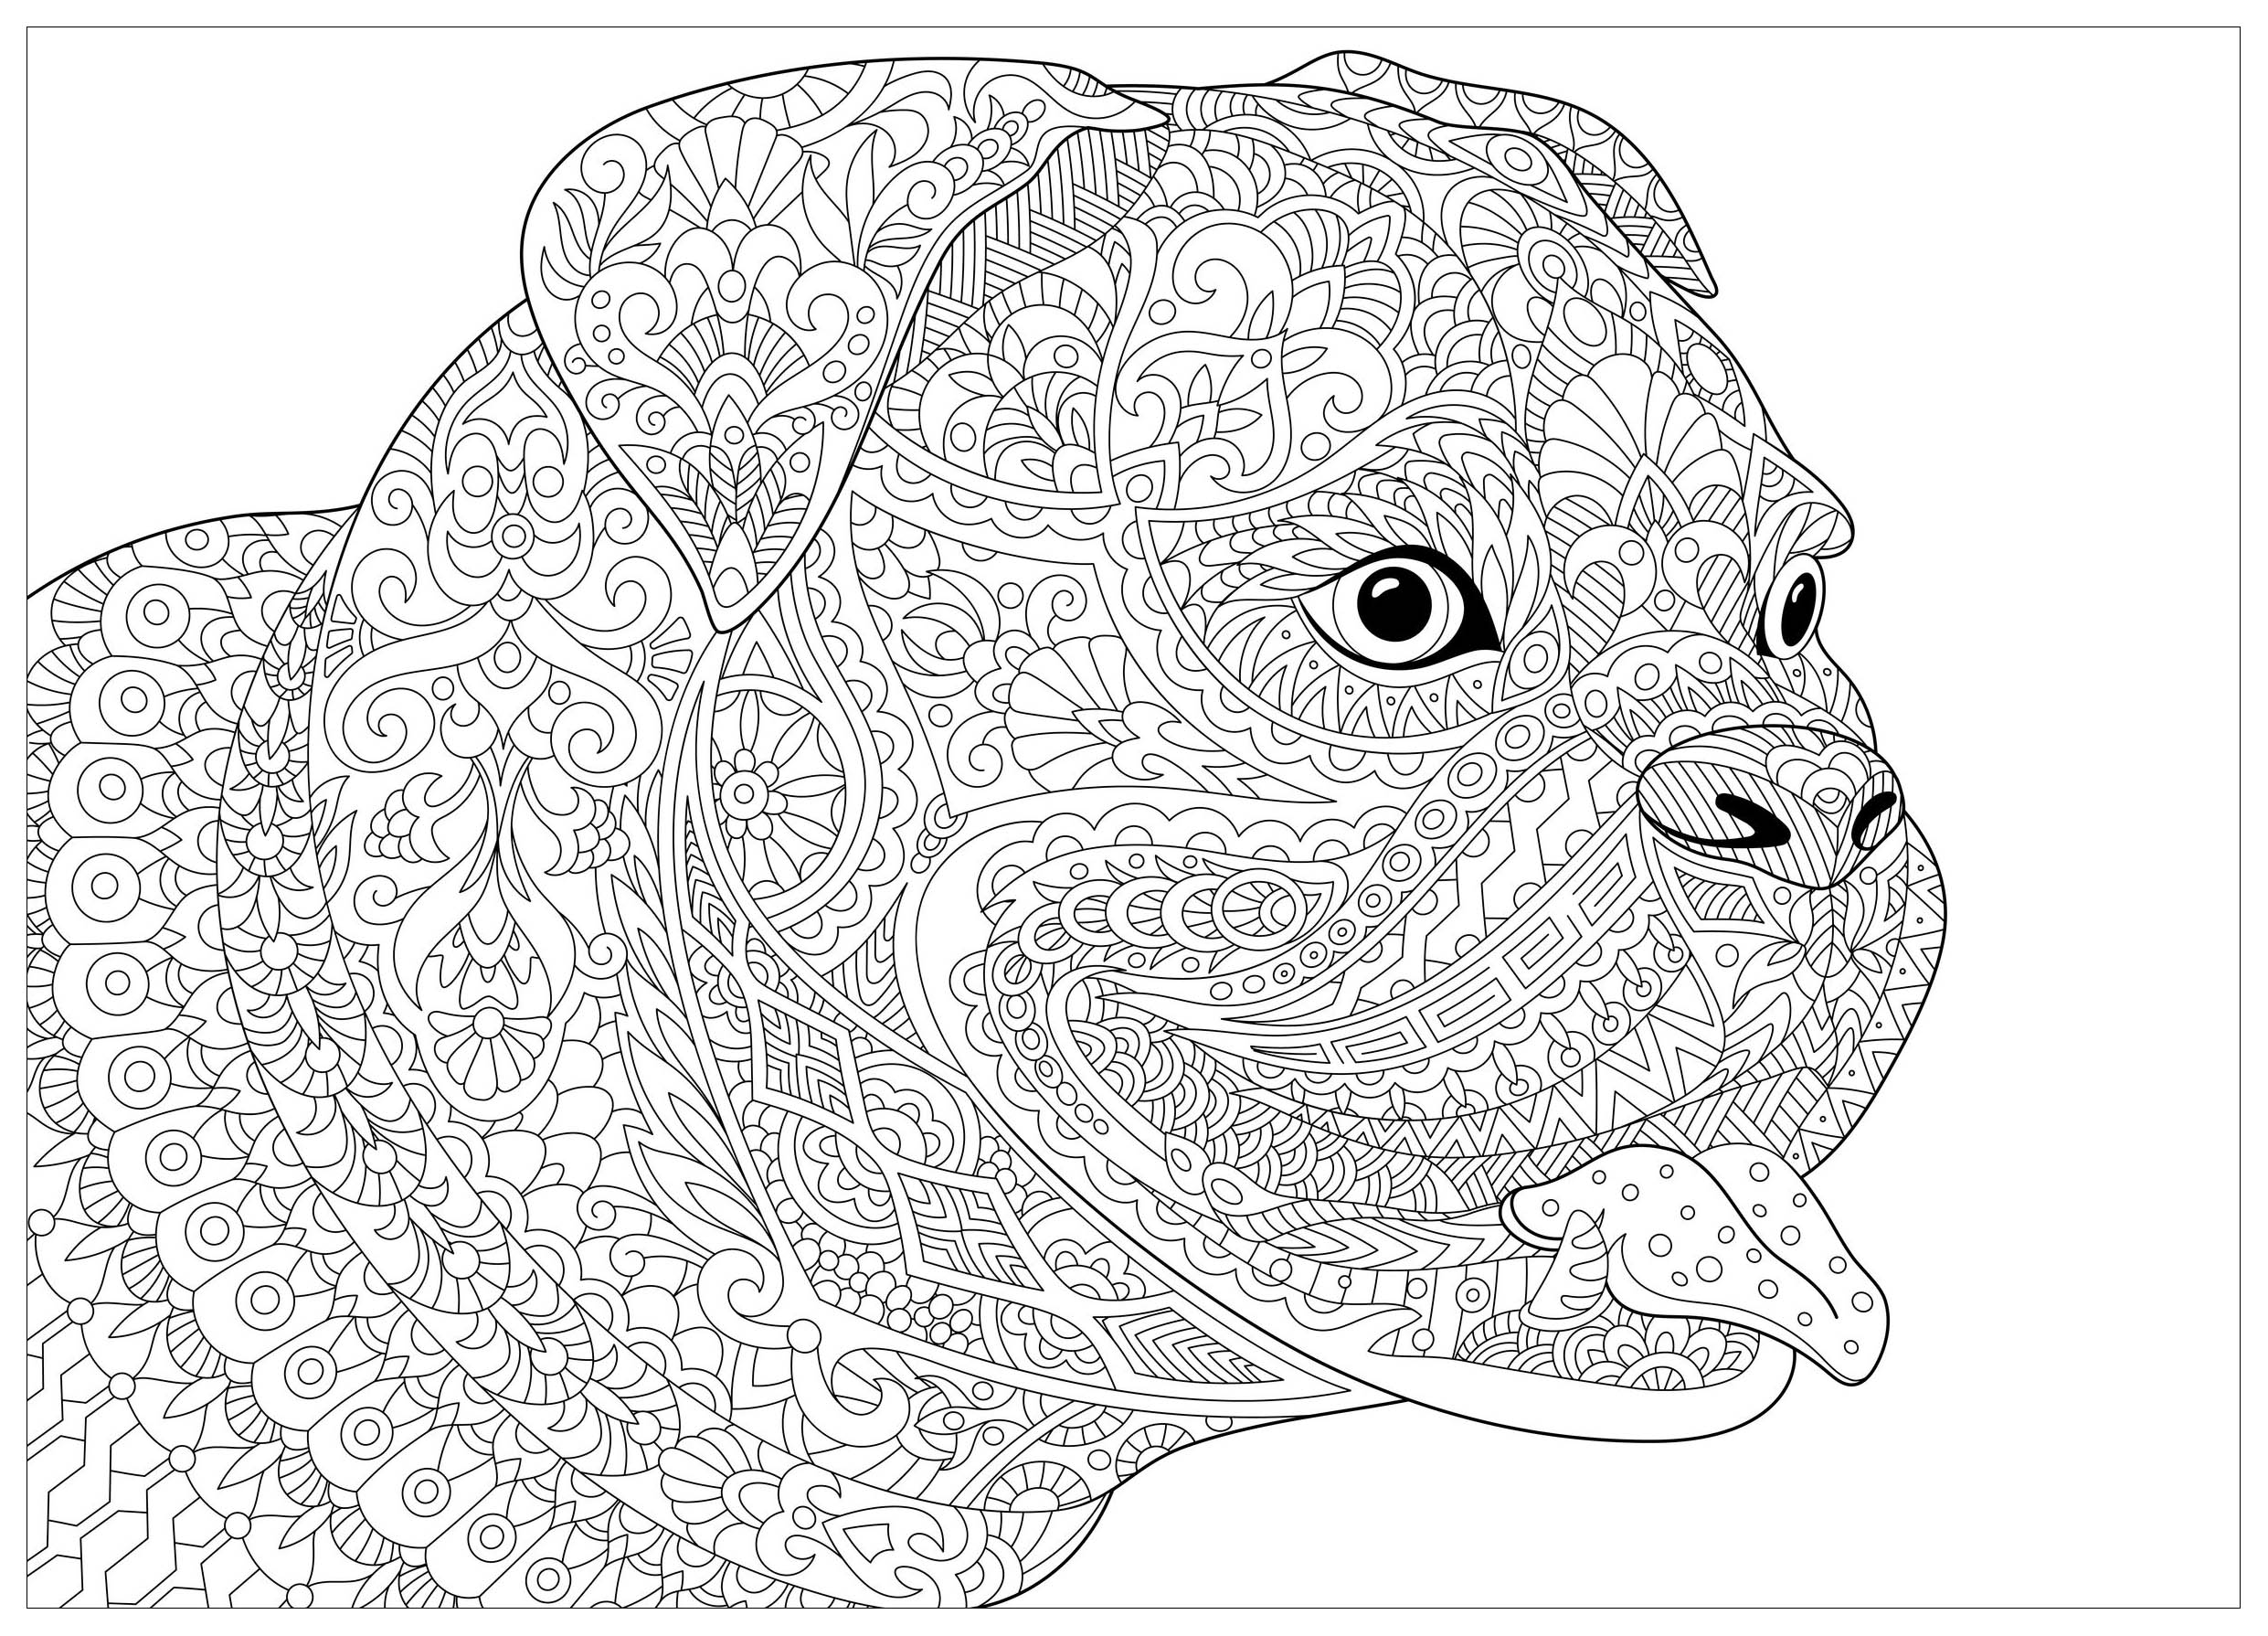 Dog french bulldog - Dogs Adult Coloring Pages